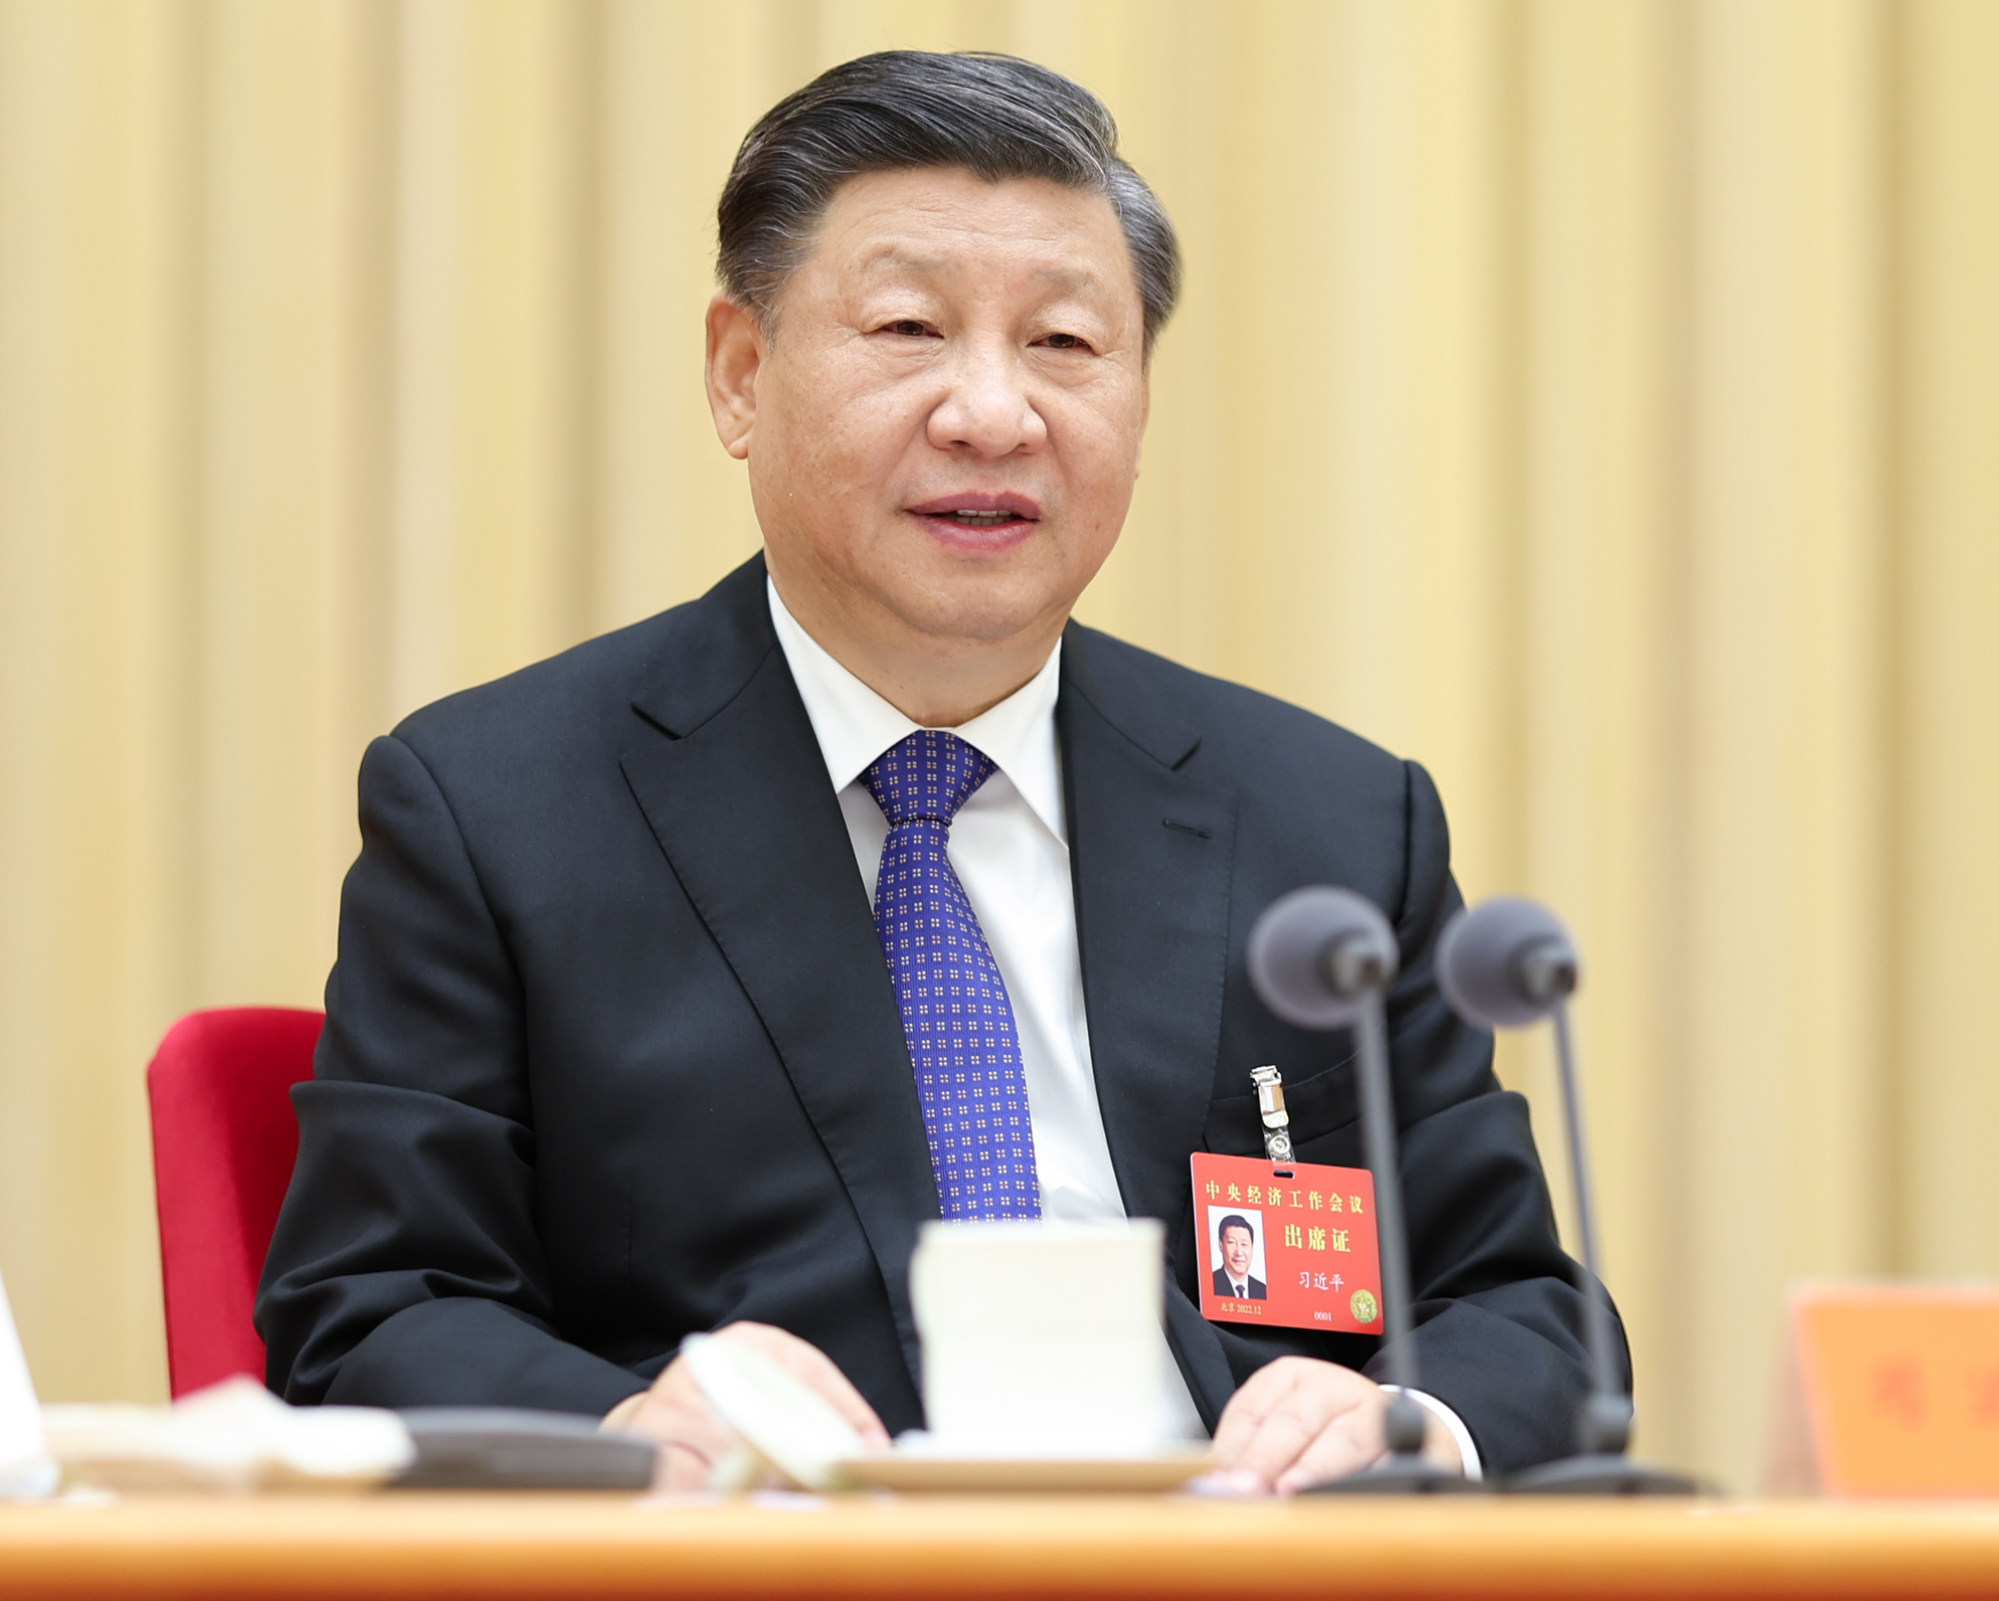 Chinese President Xi Jinping, who also serves as general secretary of the Communist Party of China’s Central Committee and chairman of the Central Military Commission, delivers his speech at the conclusion of the two-day annual Central Economic Work Conference in Beijing on December 16, 2022. Photo: Xinhua